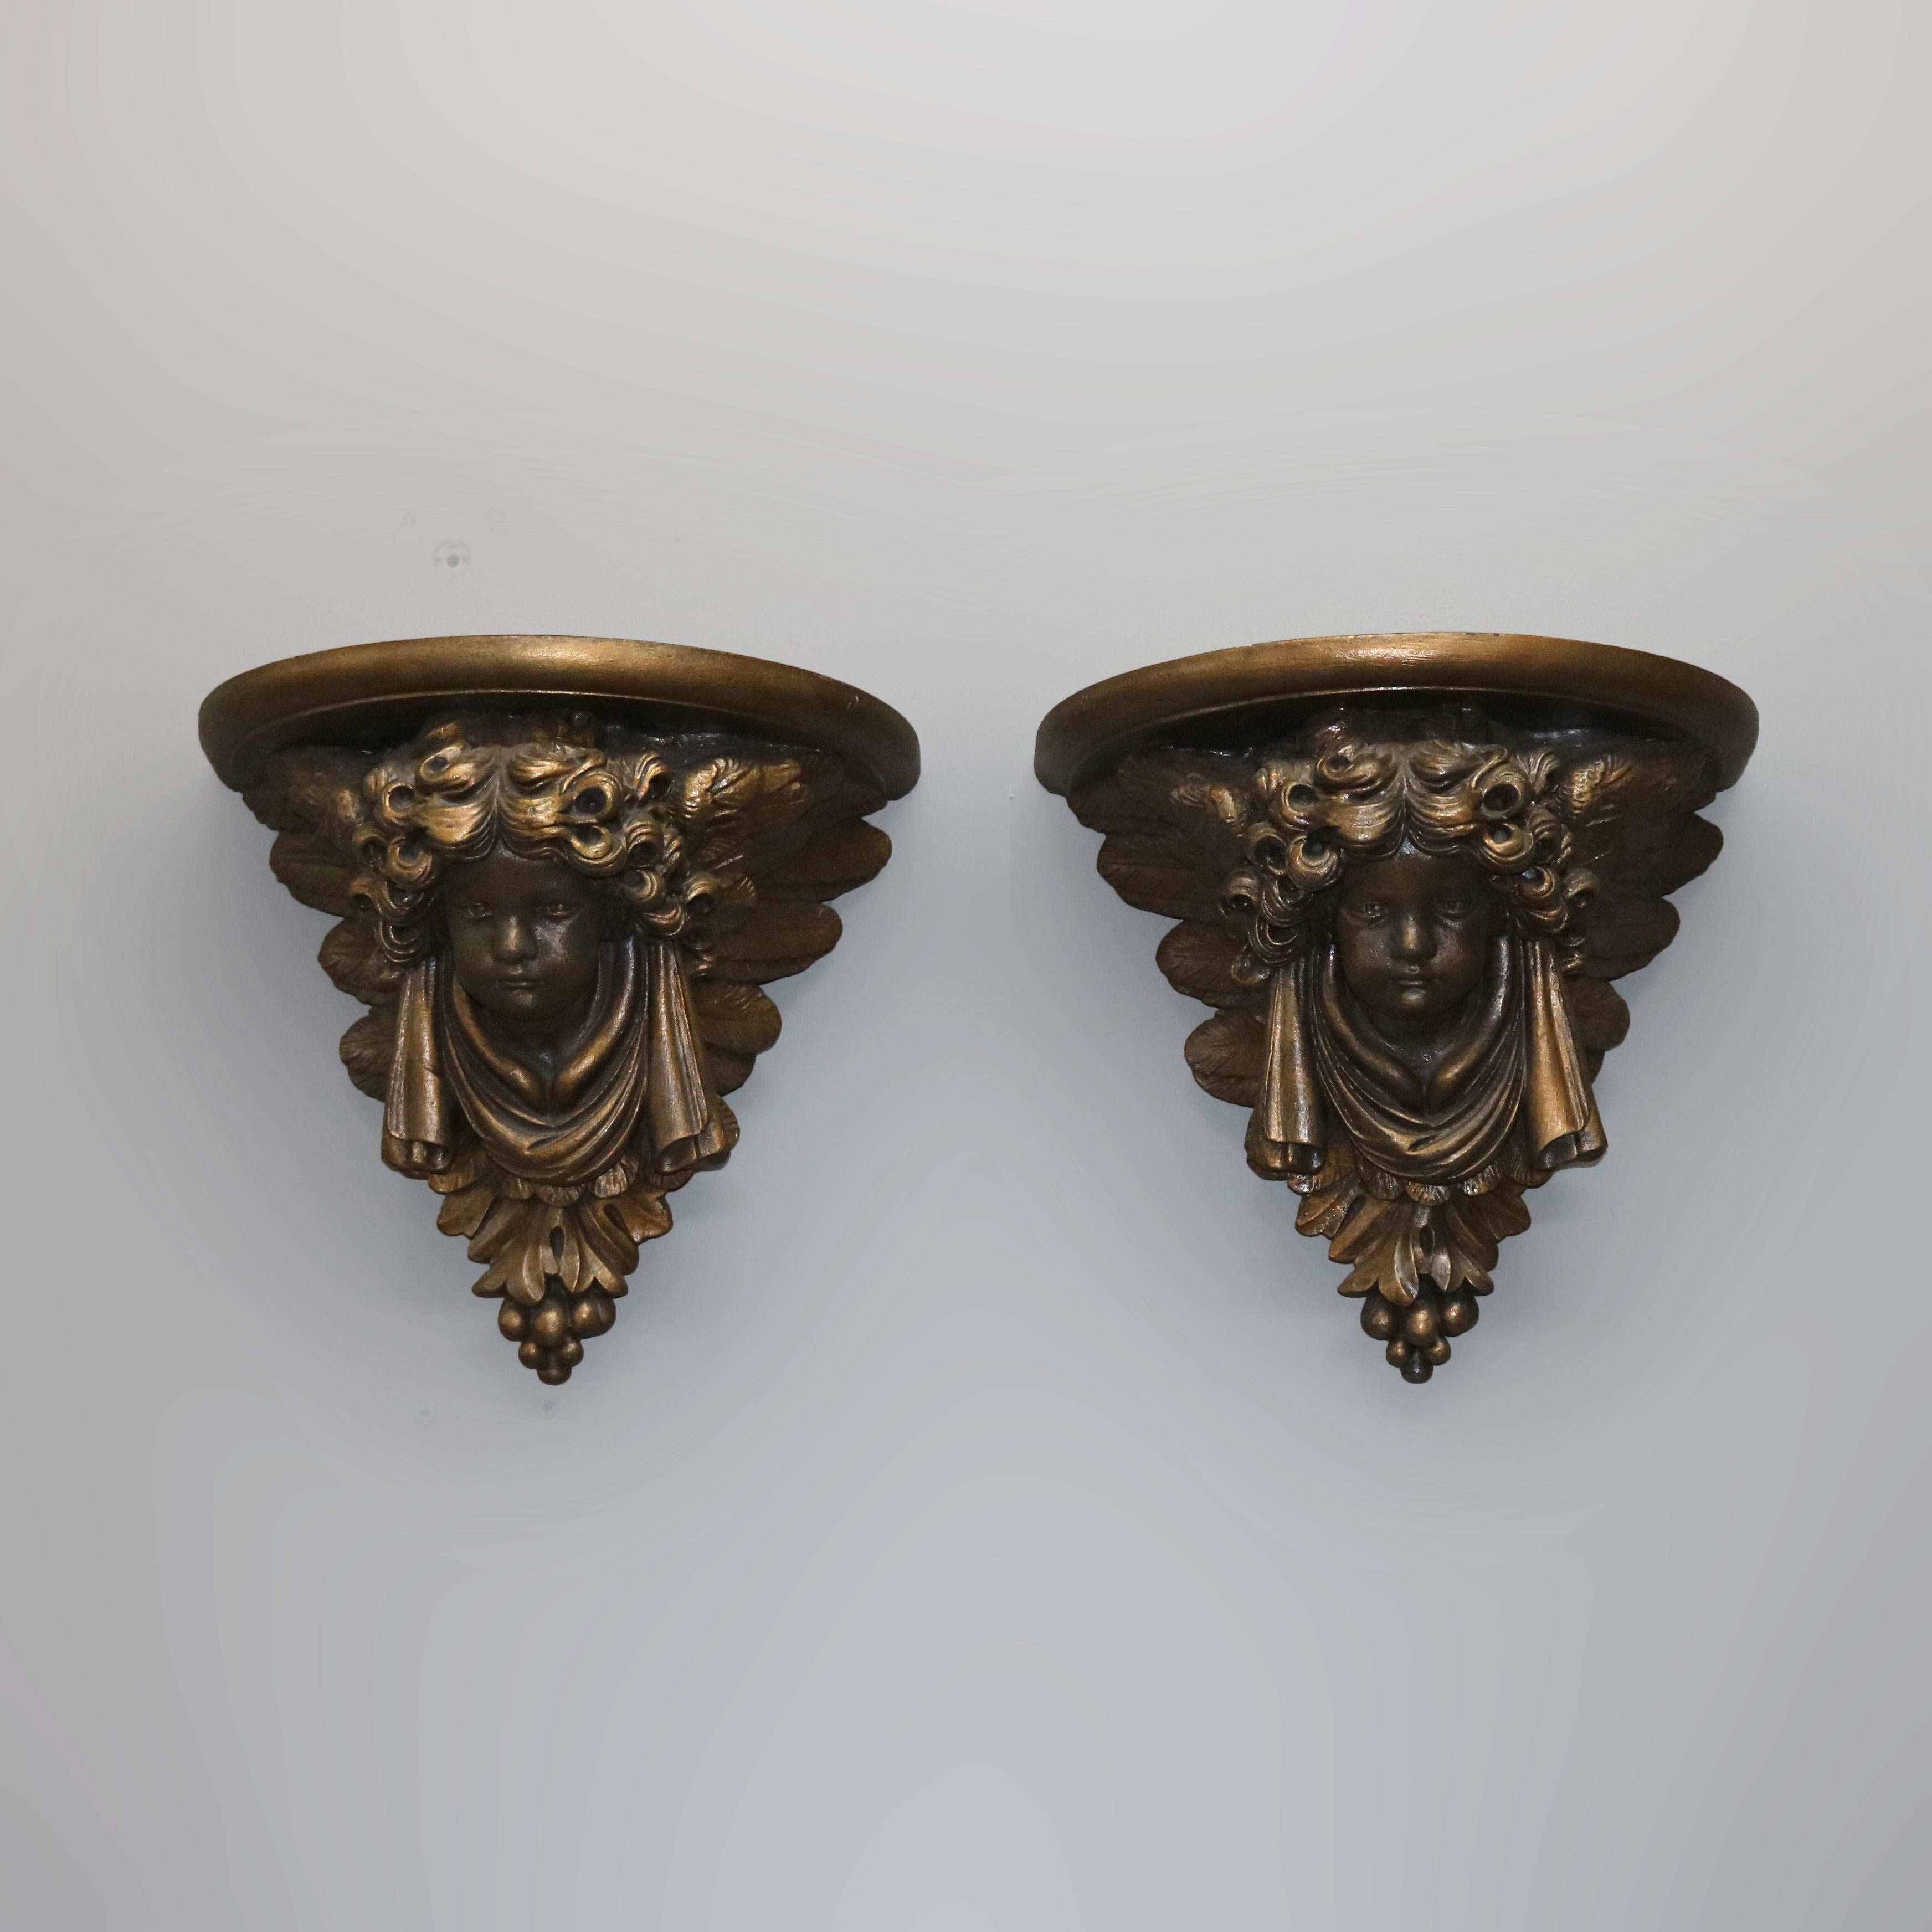 Composition Pair of Figural Classical Cherub Composite Wall Shelves, 20th Century